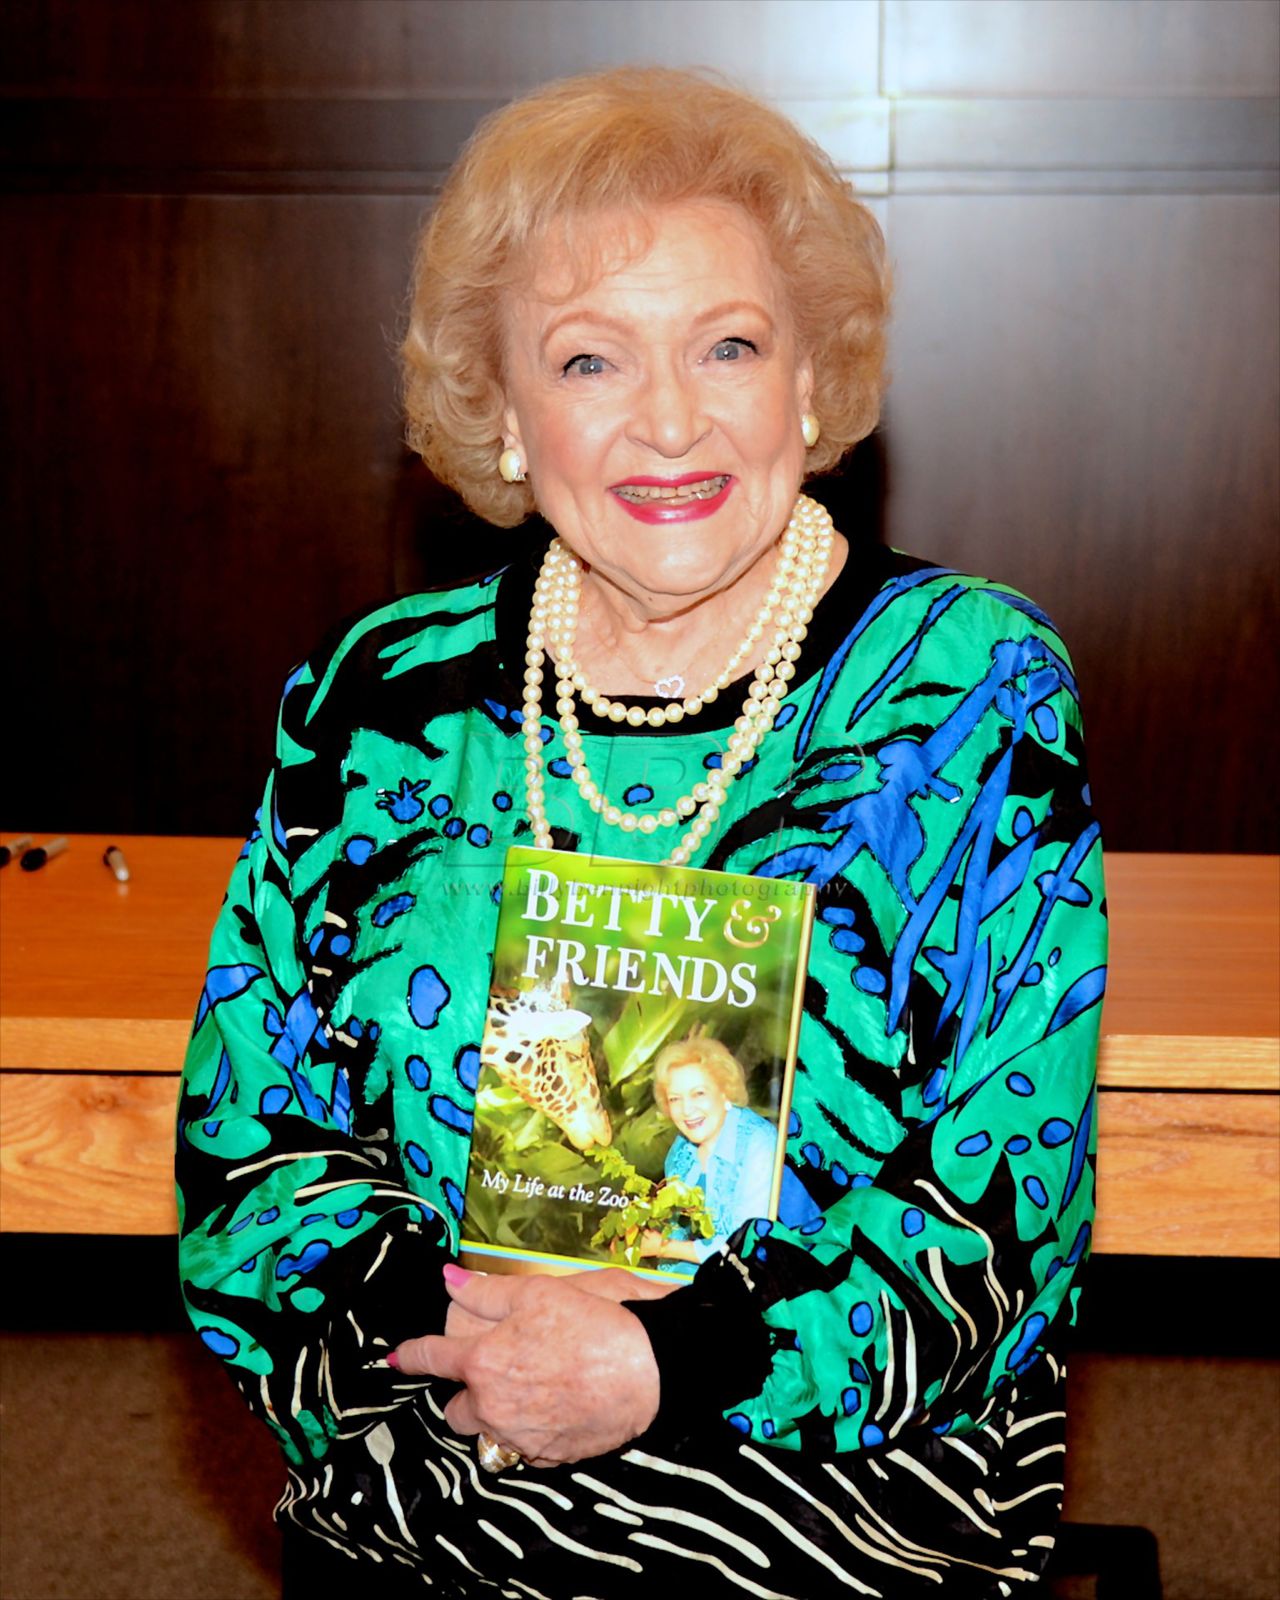 Betty White nie żyje | fot. ONSBetty White Book Signing  at Barnes and Noble for "Betty & Friends: My Life at the Zoo" book release